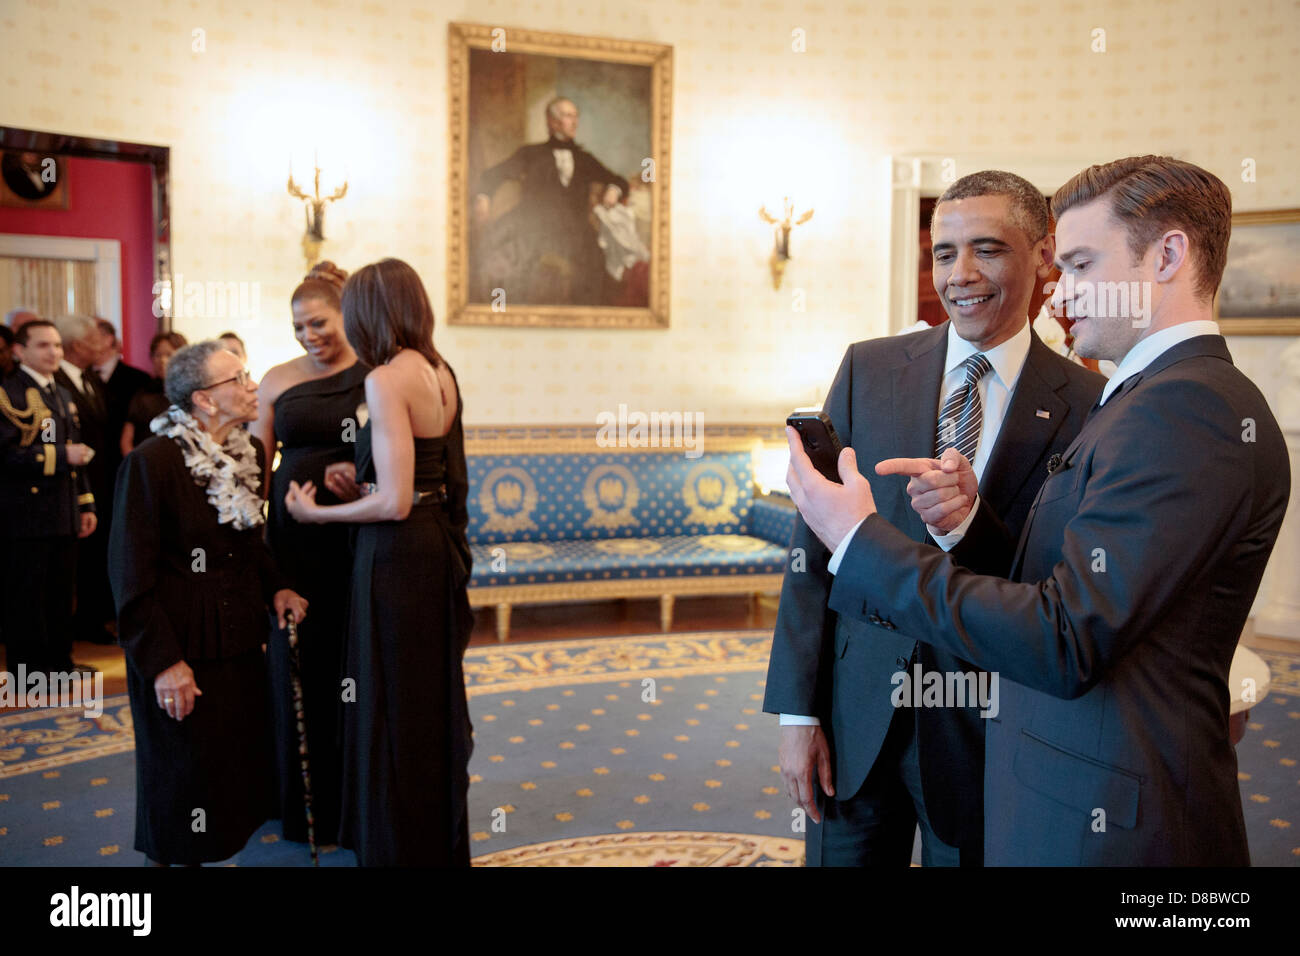 US President Barack Obama talks with performer Justin Timberlake in the Blue Room prior to the “In Performance at the White House: Memphis Soul” concert in the East Room of the White House, April 9, 2013 in Washington, DC. Stock Photo